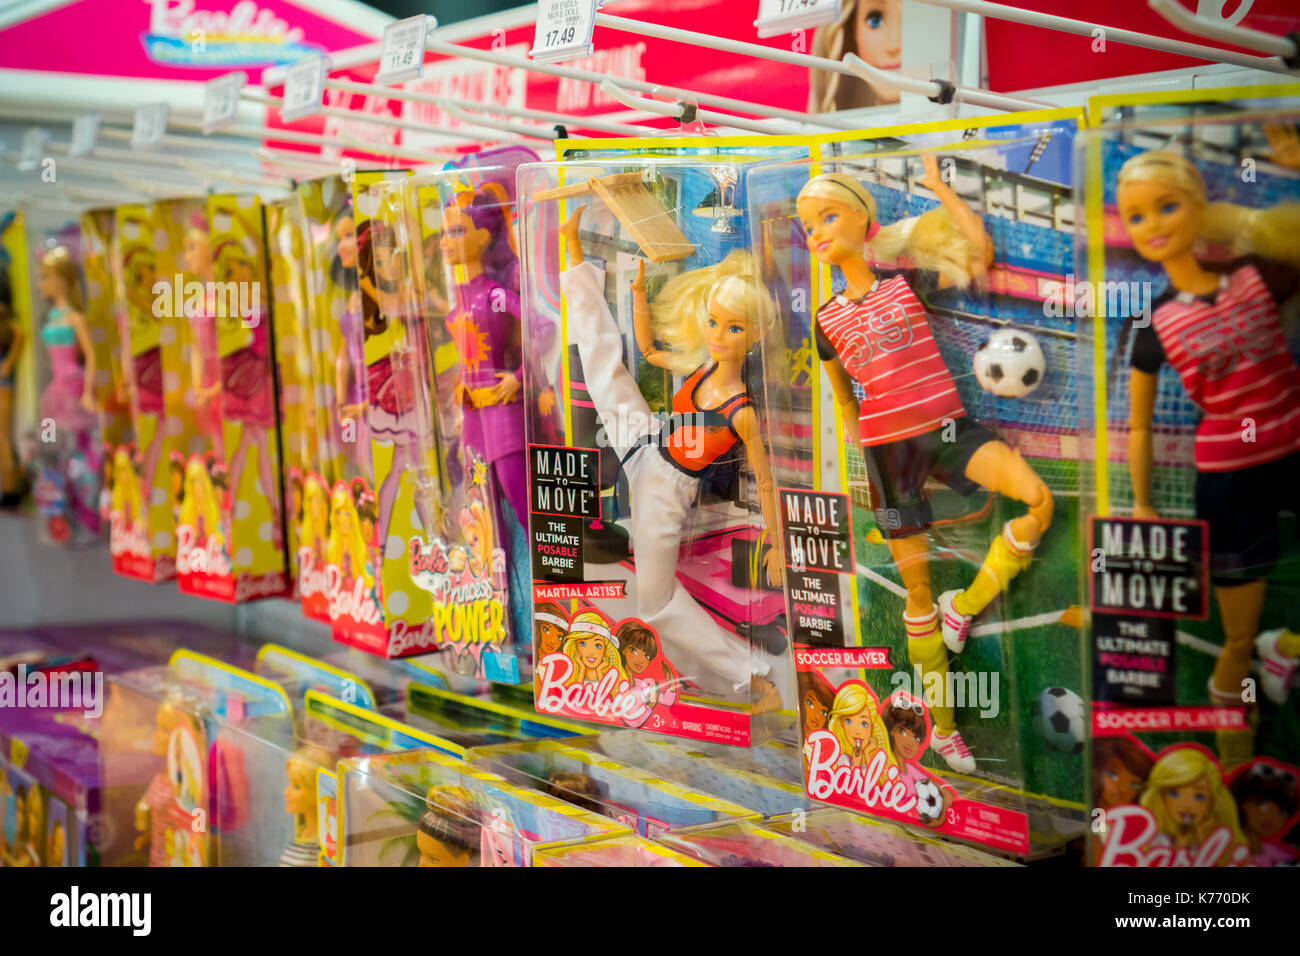 A selection of Mattel Barbie dolls in the temporary Toys R Us location in  Times Square in New York on Thursday, September 7, 2017. The location is a  return to the area